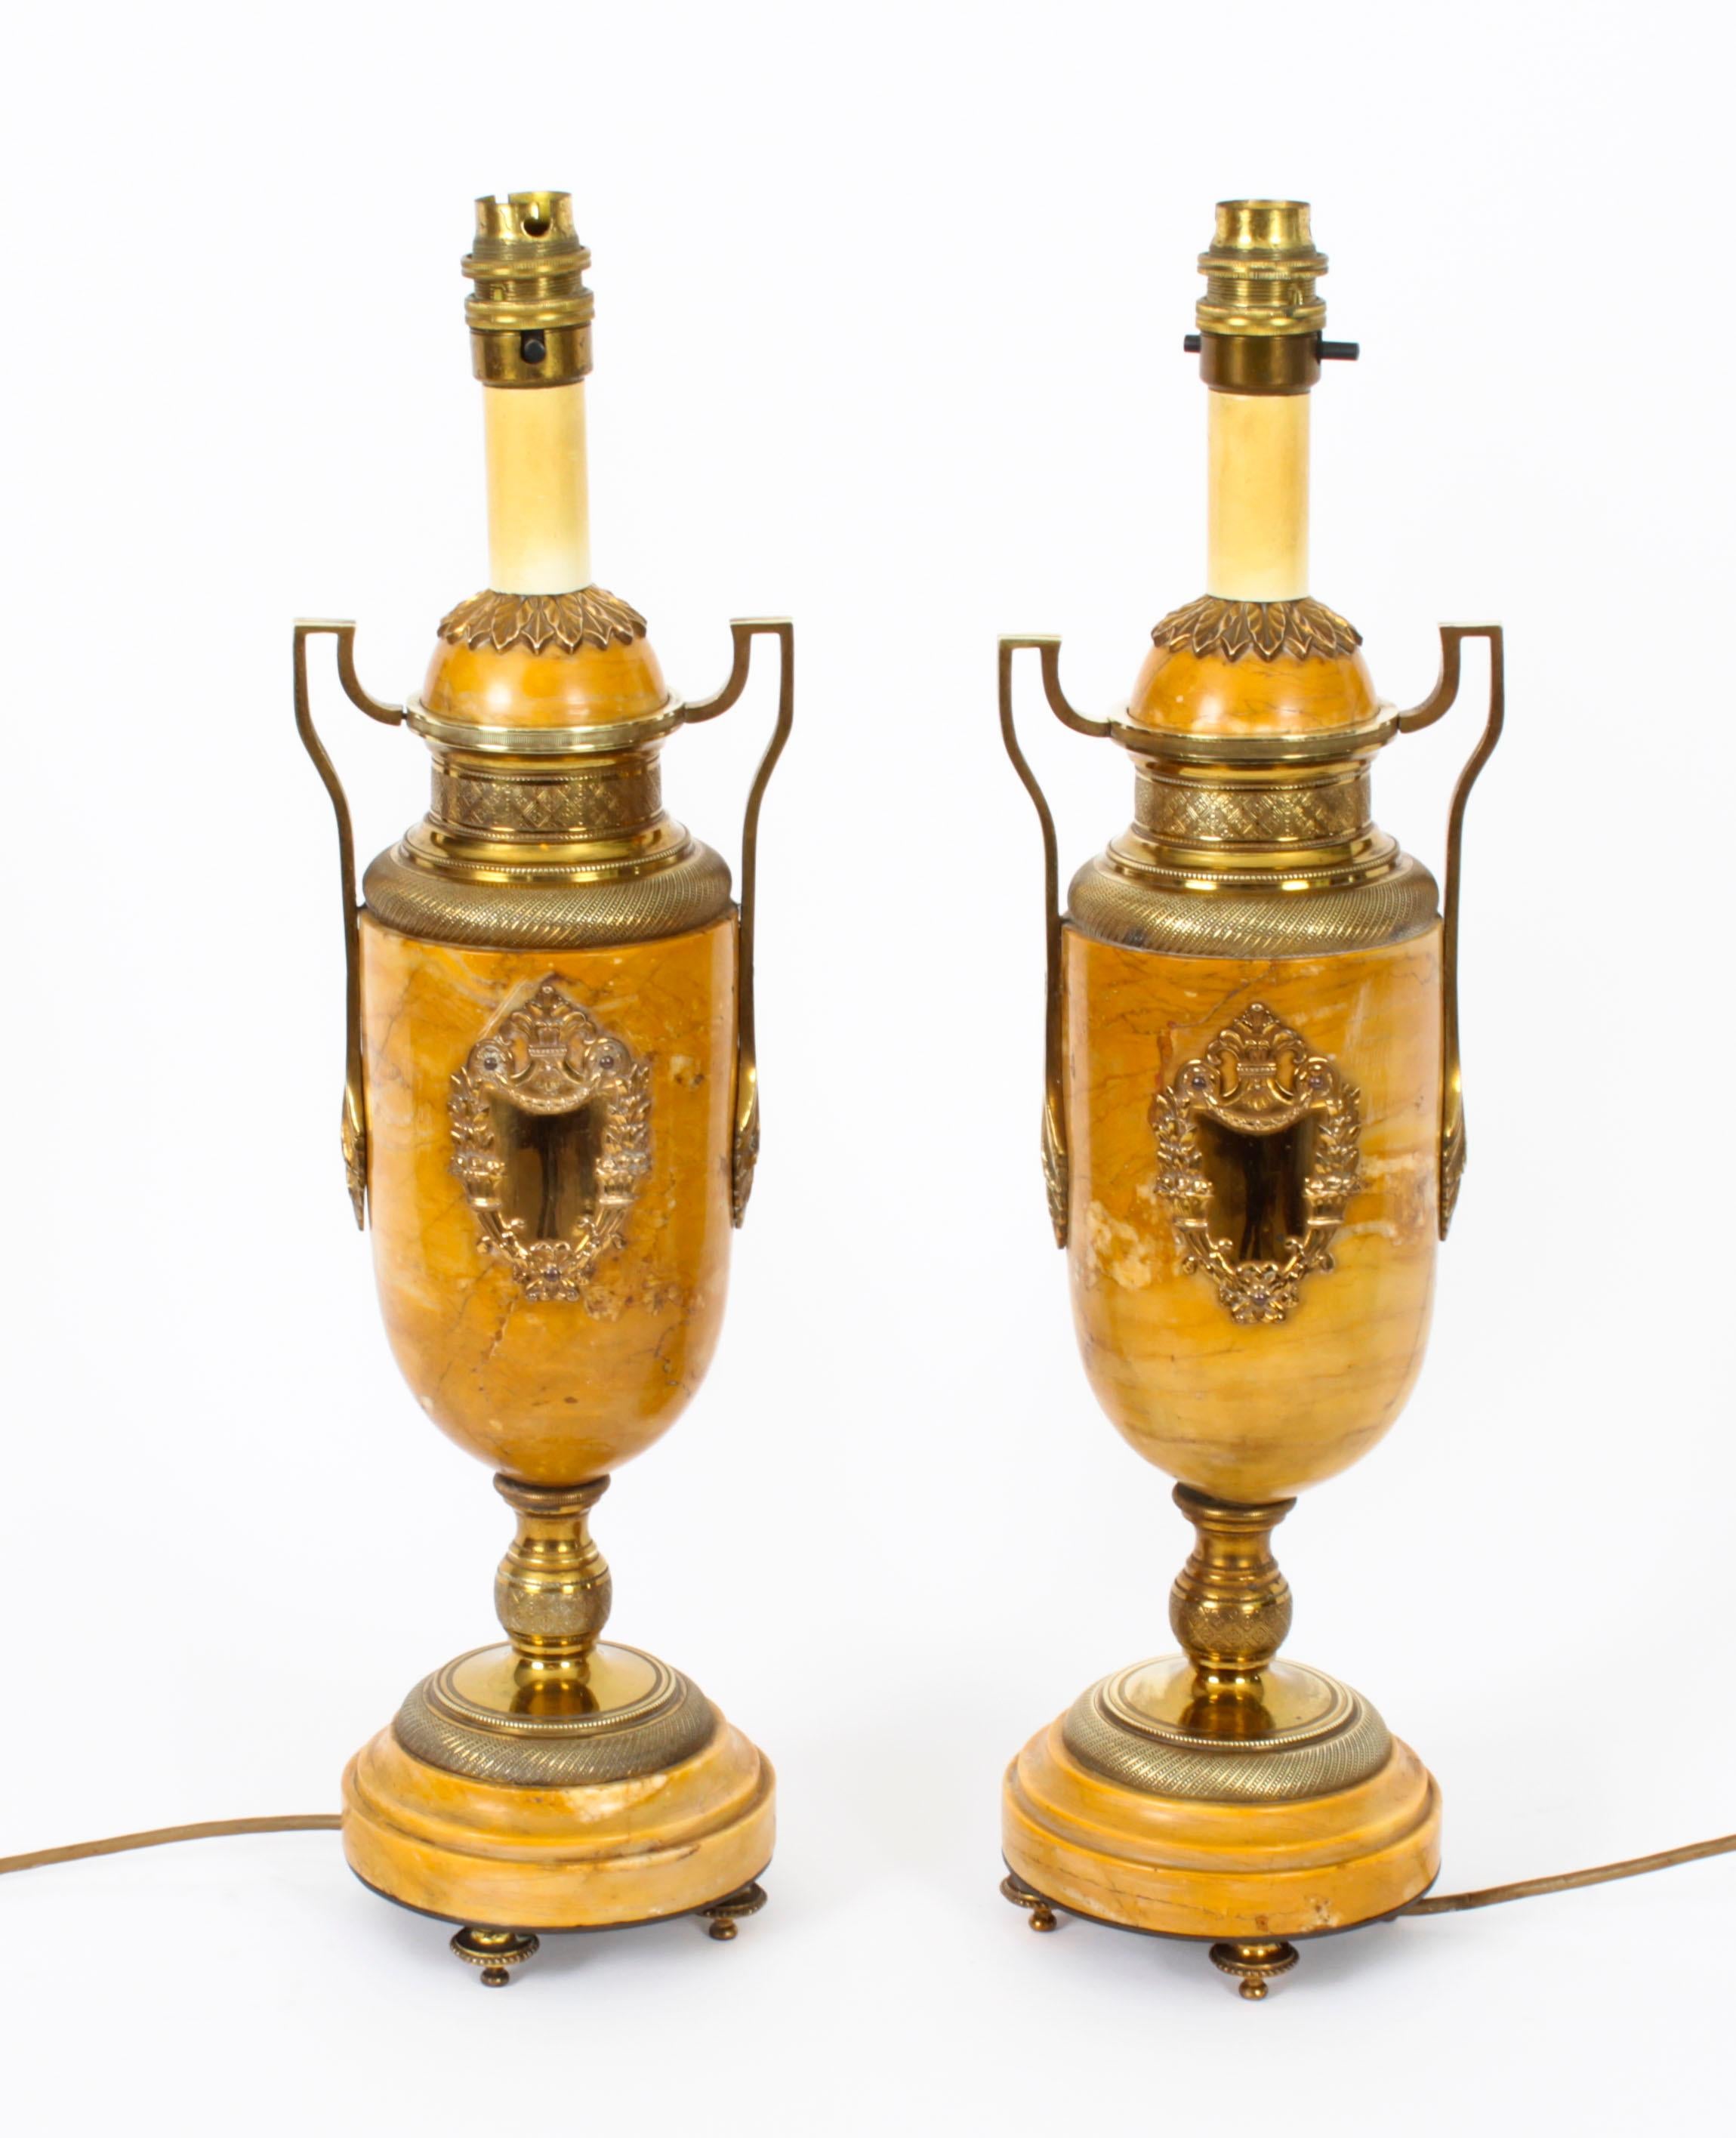 An antique pair of French ormolu mounted and Giallo di Siena marble Neo Classical table lamps, Circa 1870 in date.
 
The pair are of baluster form with twin ormolu handles and ormolu cartouches, raised on circular socles and plinths with ormolu